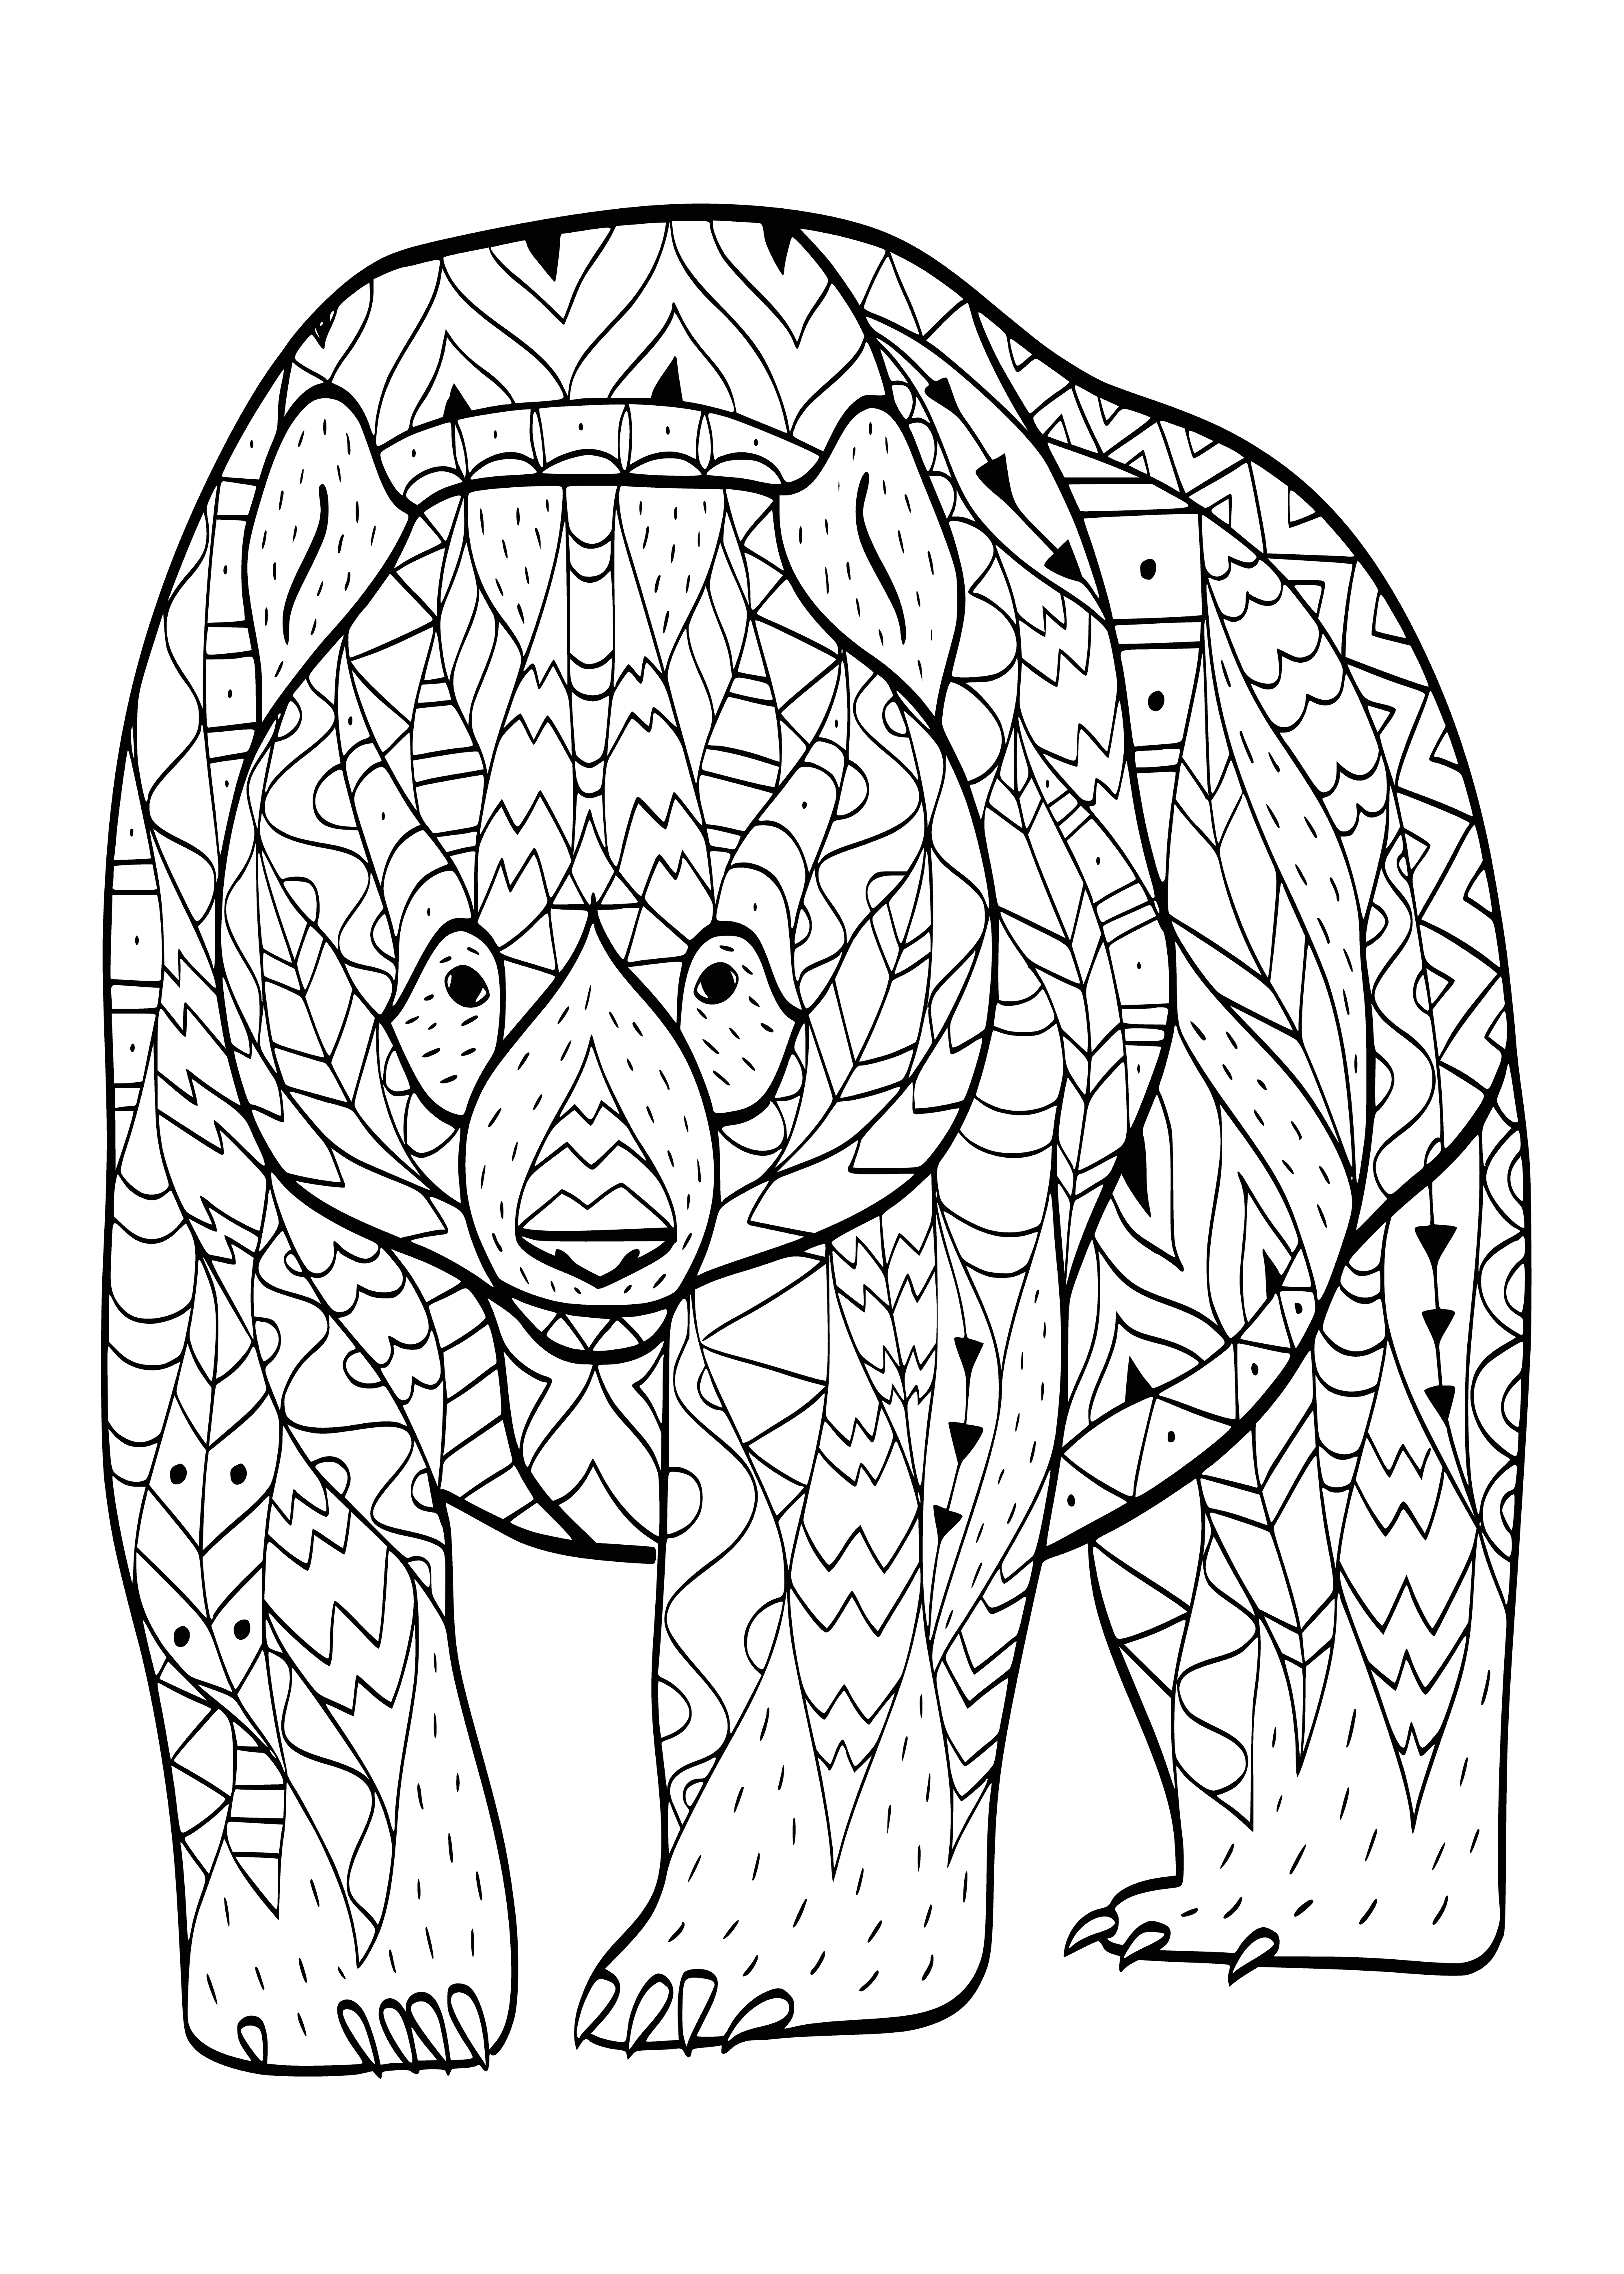 coloring page: Bear stands on hind legs, arms outstretched, mouth open & tongue out; eyes closed. #coloring #bear